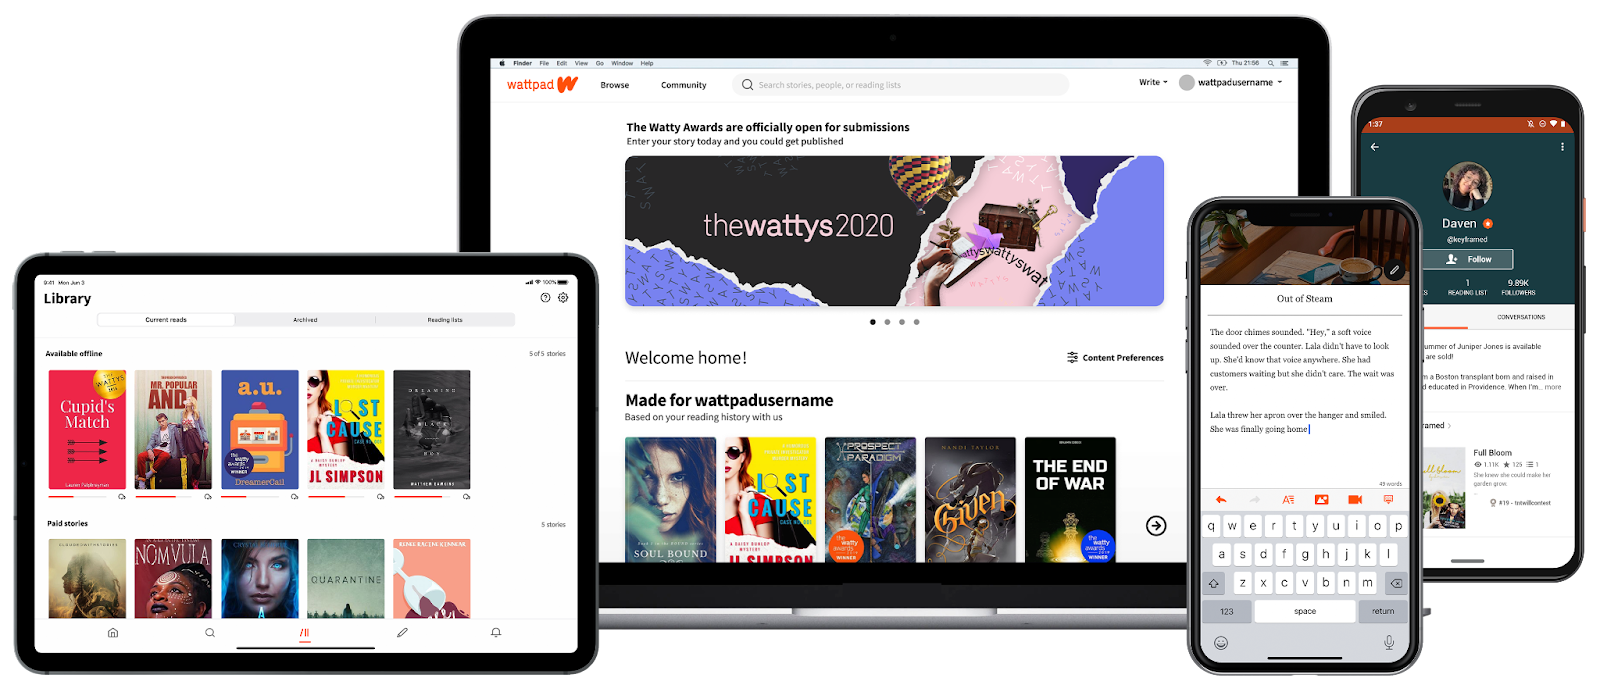 Wattpad Works with Brands to Create Meaningful Stories through Impactful Storytelling